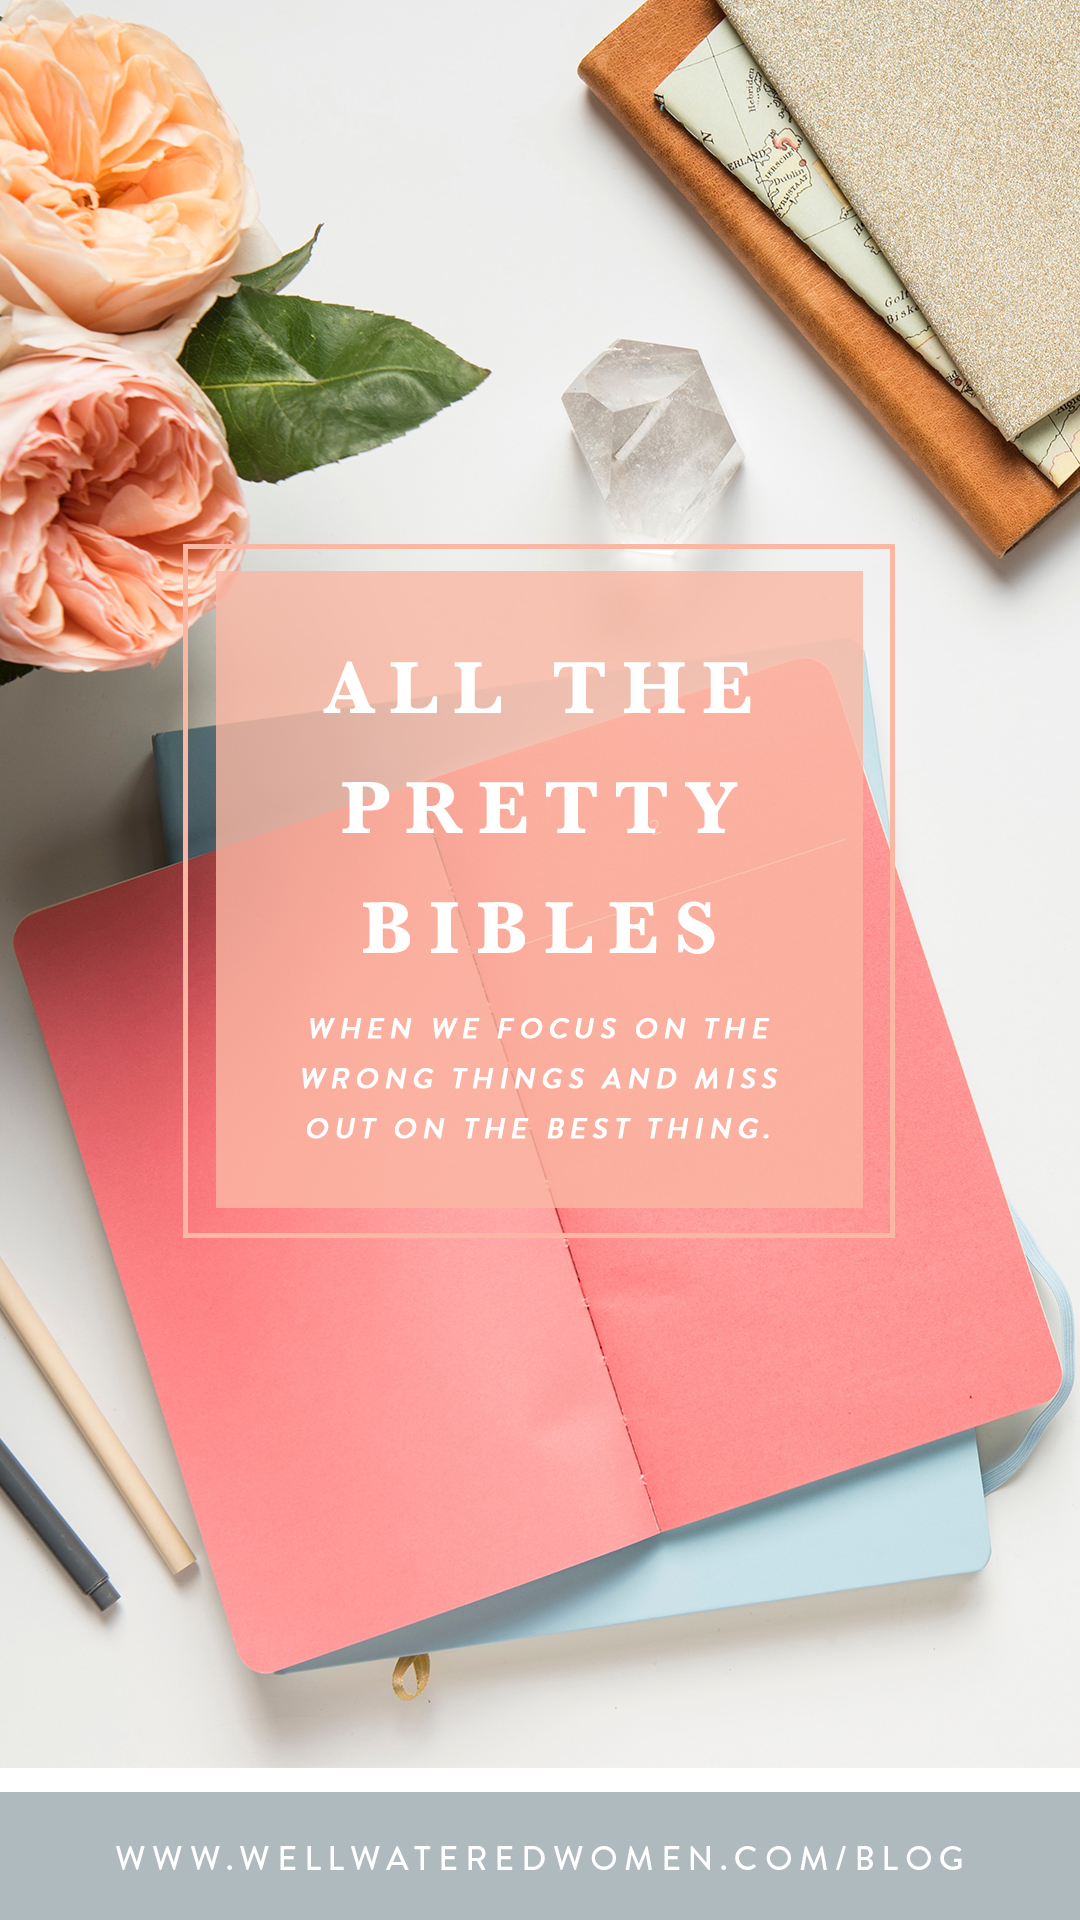 The Pretty Bible - When we focus on the wrong things and miss out on the best thing: They don't say anything different. And if you don't make time for the one you have at home, you won't make time for one of these. No matter how pretty it is.